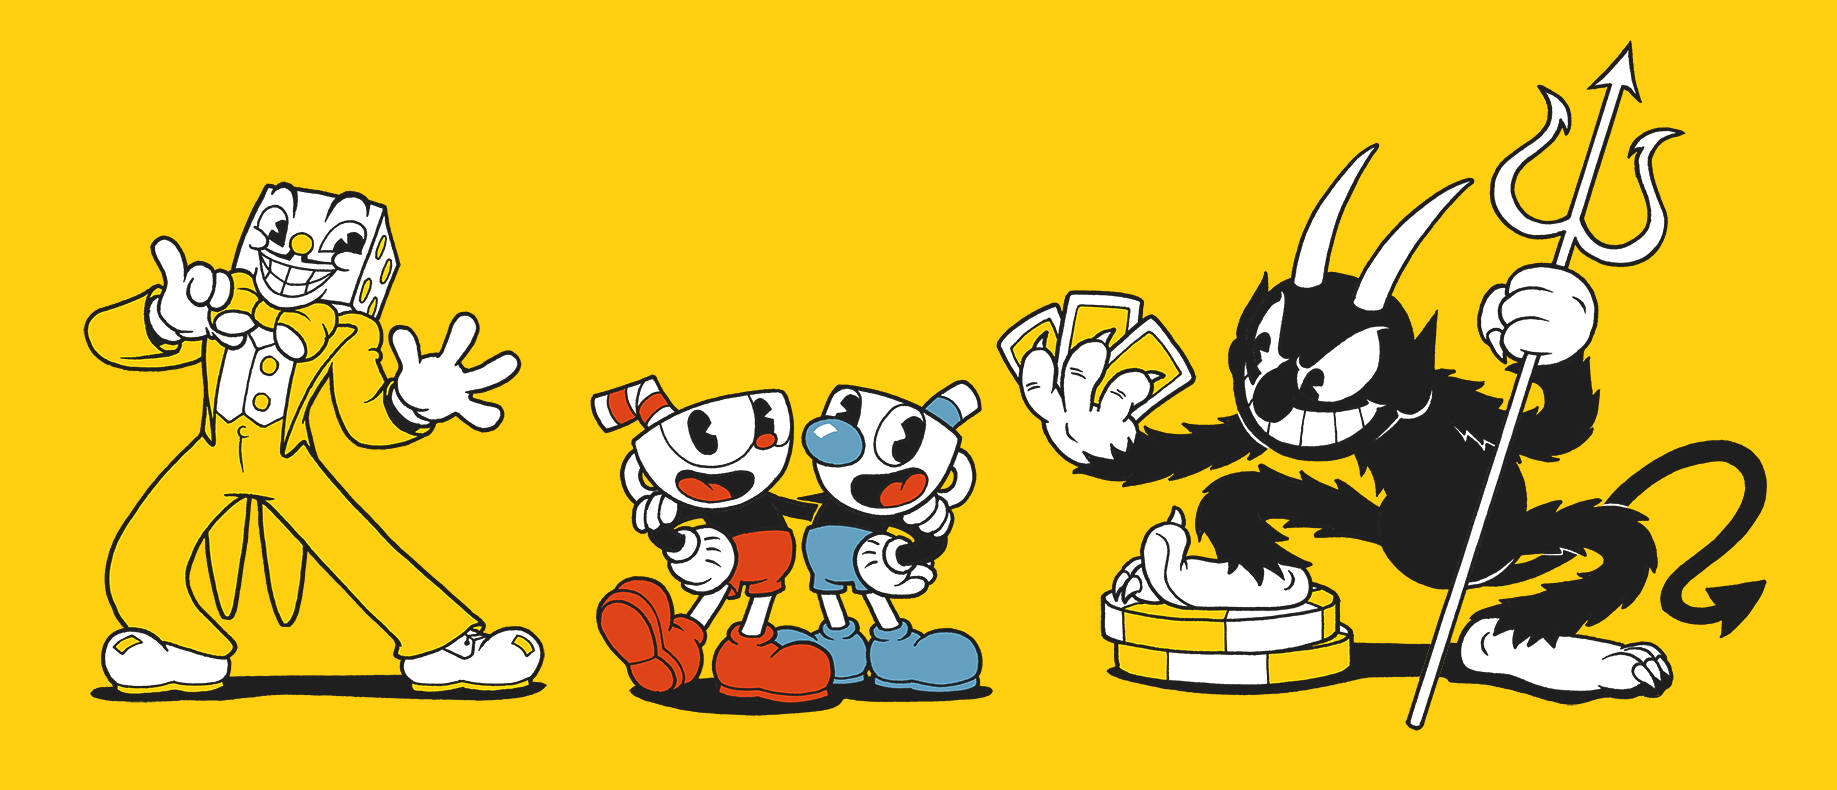 Vivid Cuphead Poster In Yellow